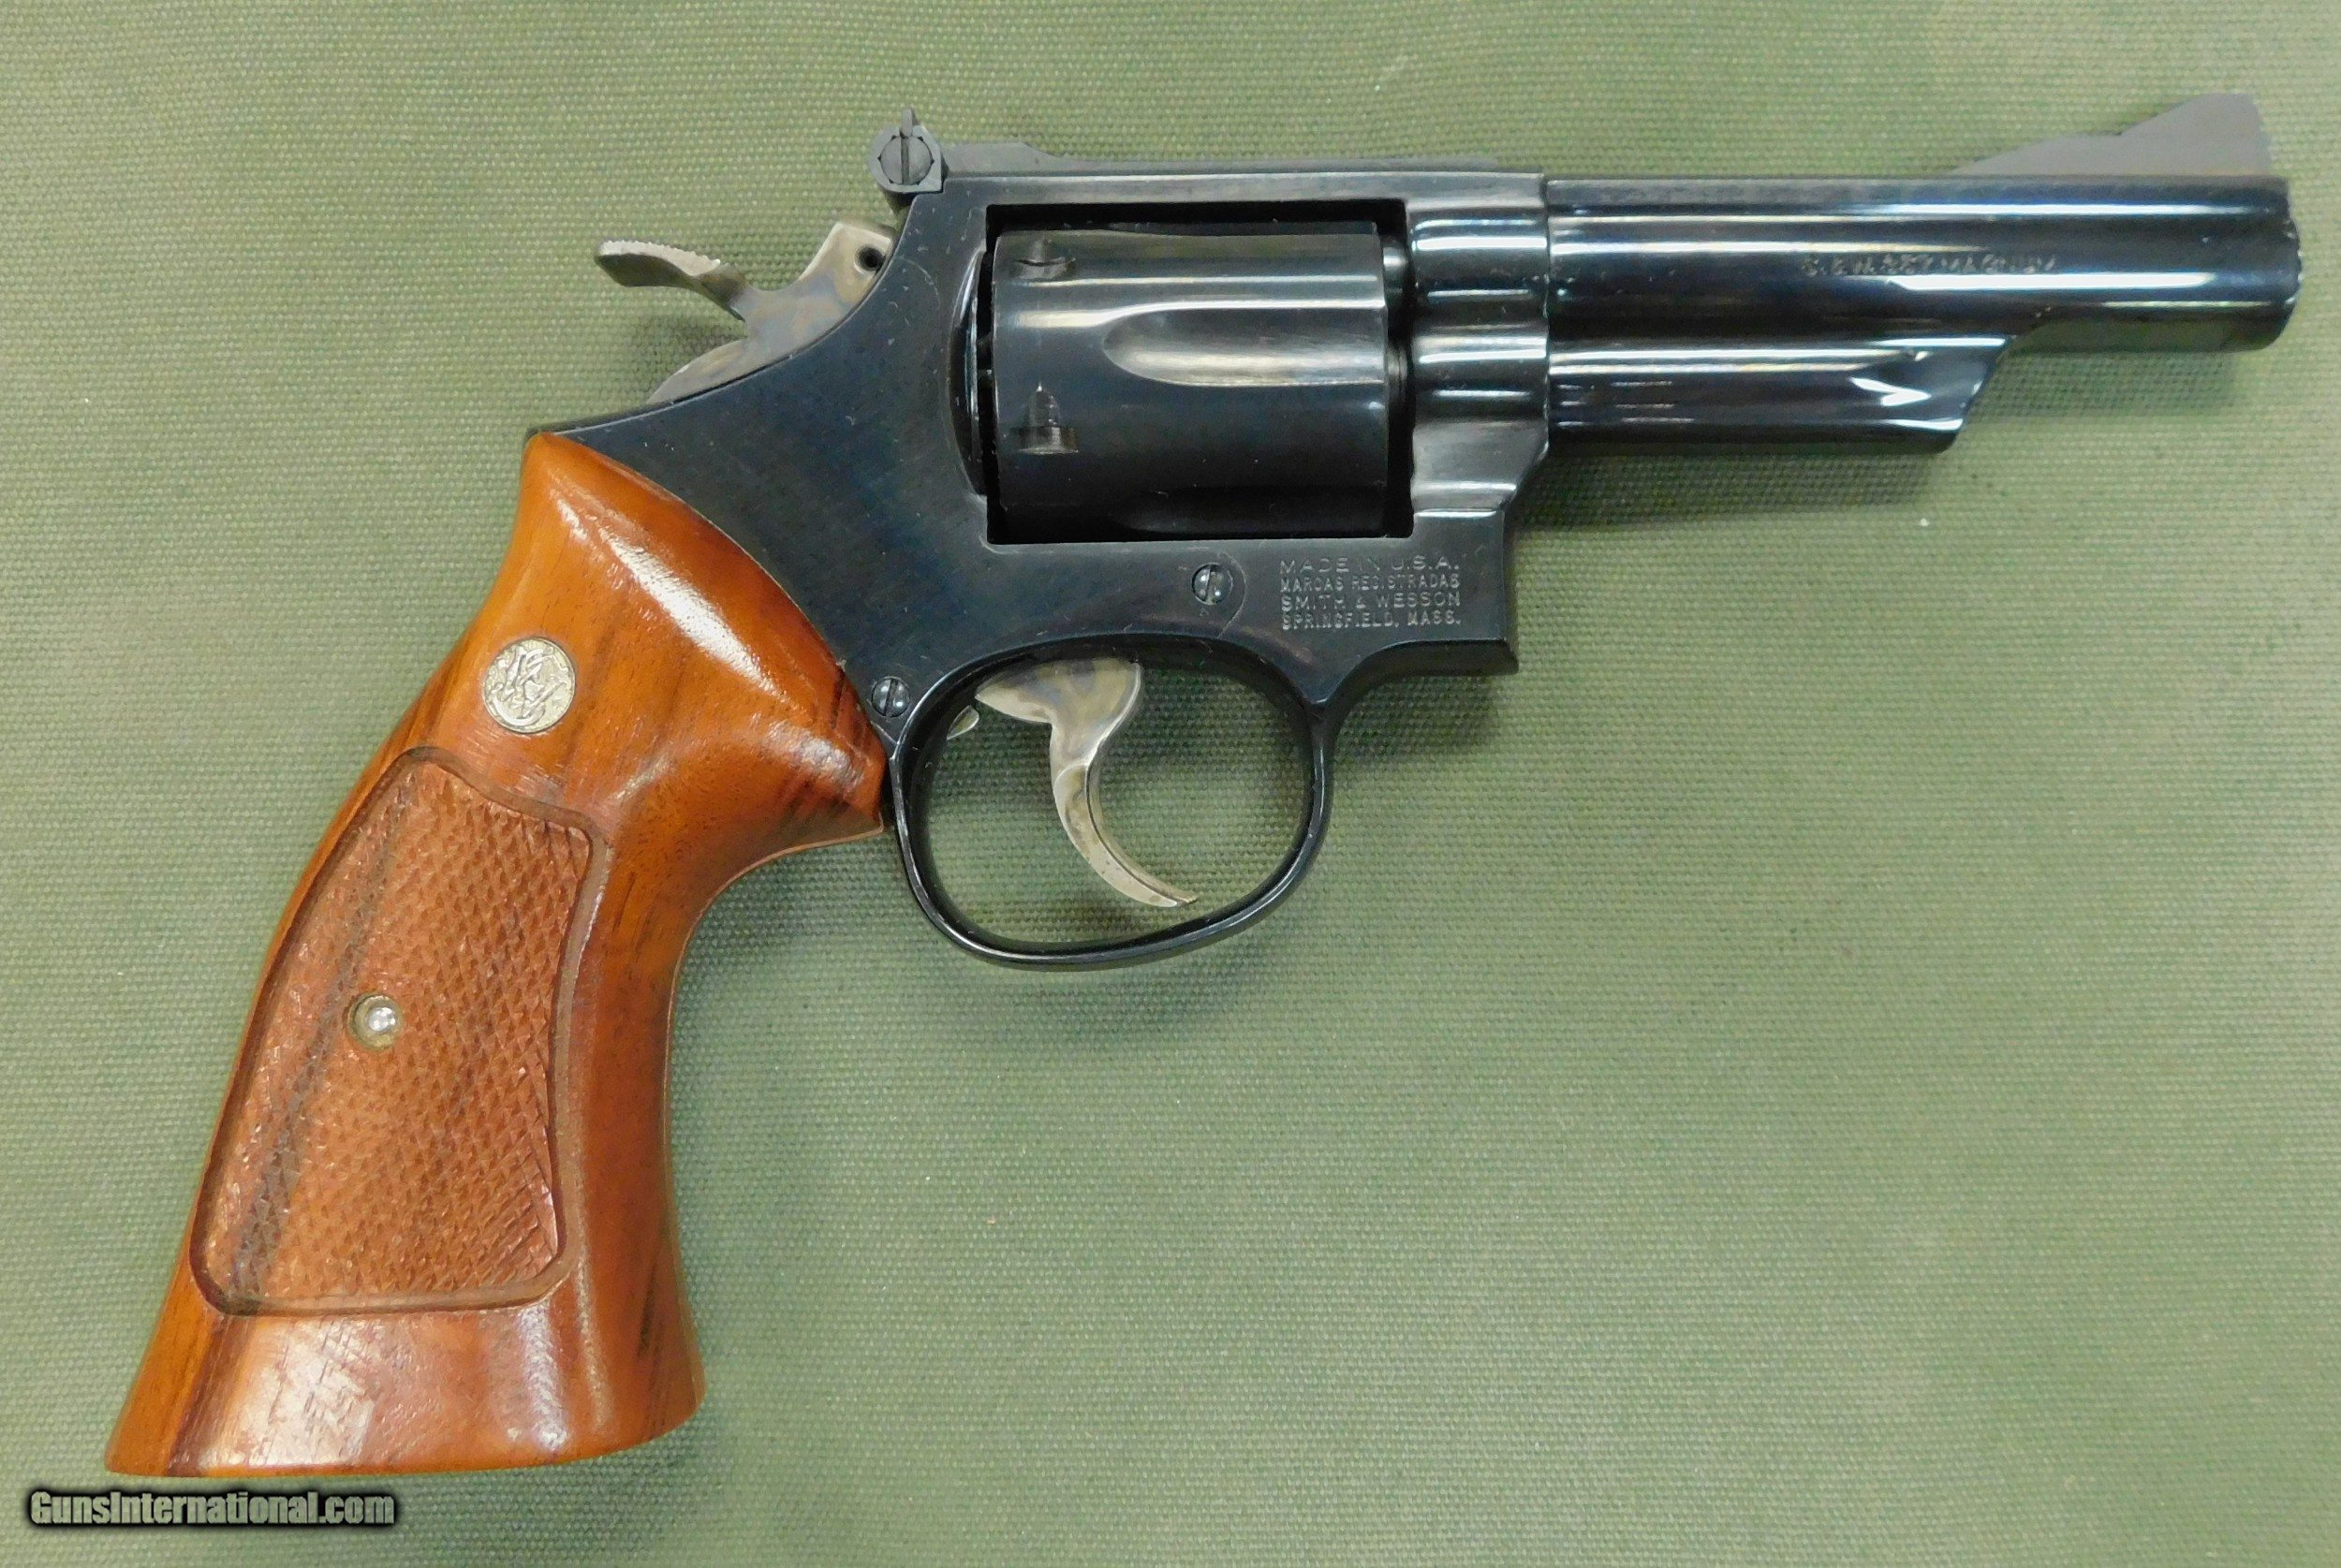 Smith & Wesson model 19-5 357 magnum